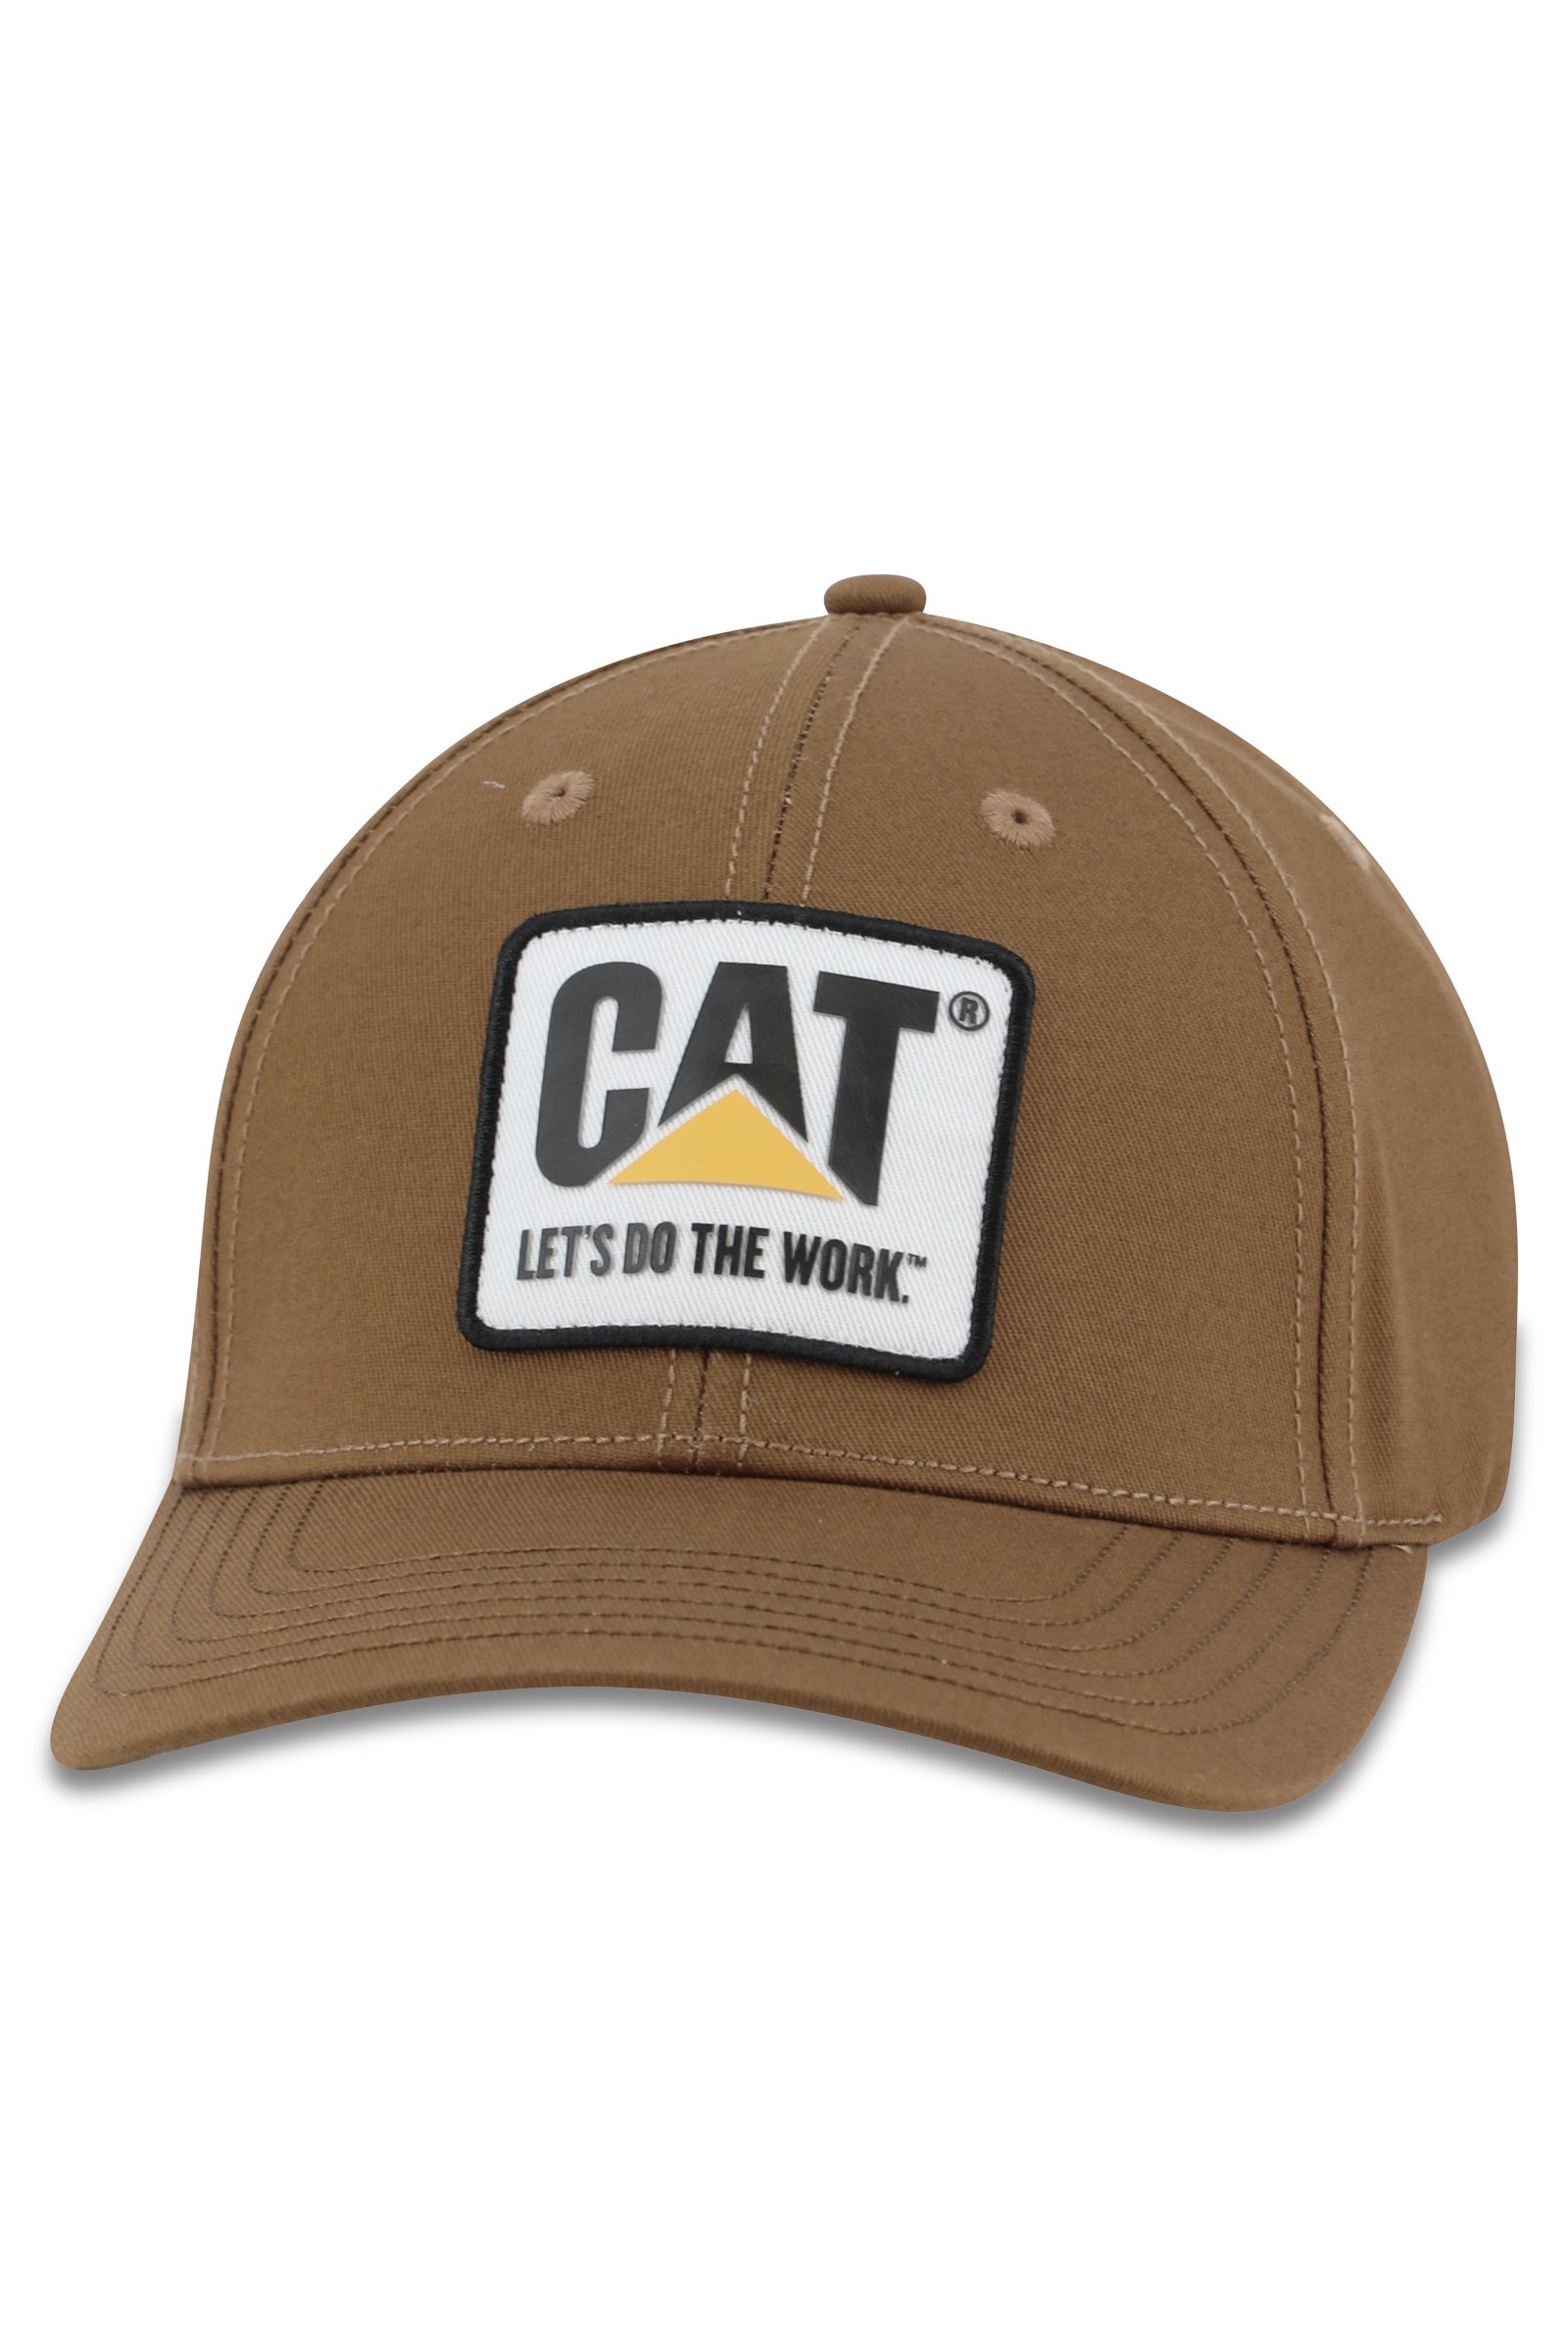 LET'S DO THE WORK PREMIUM HAT